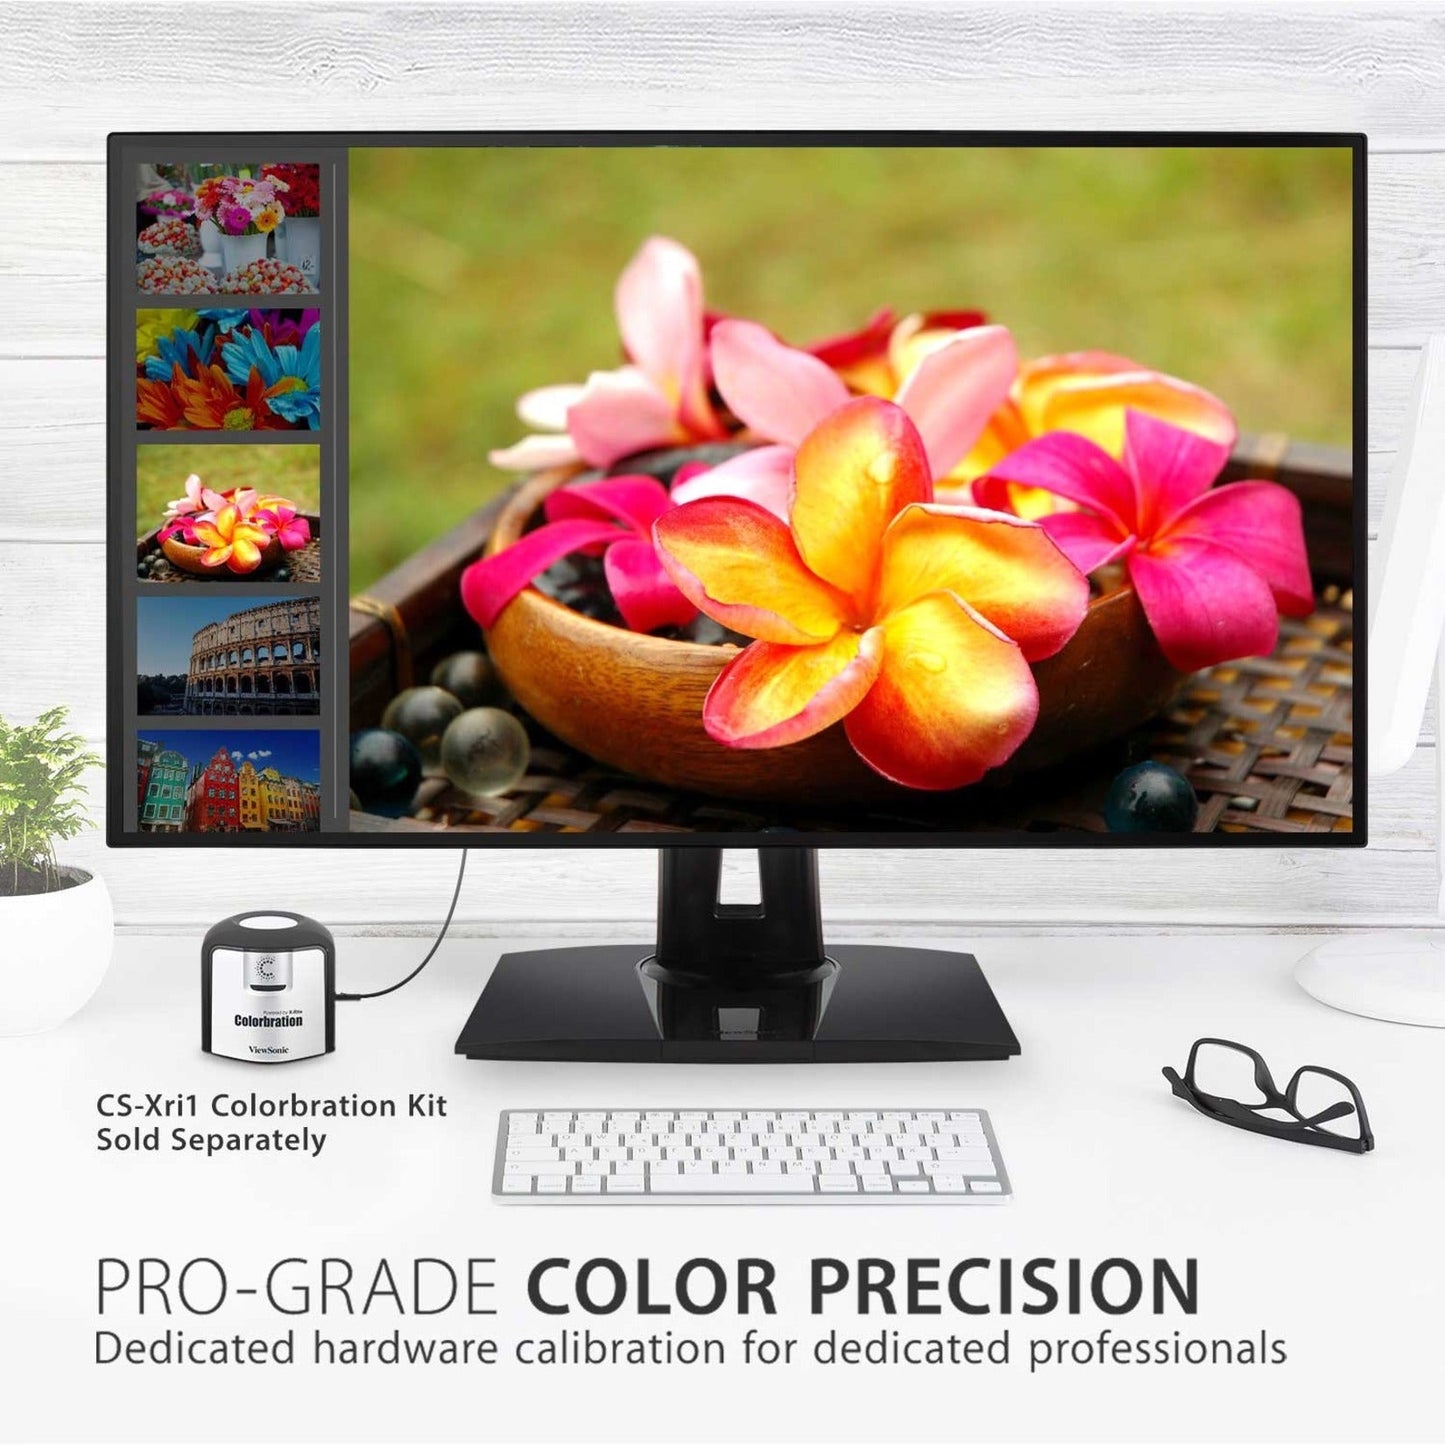 ViewSonic VP3268a-4K 32 Inch Premium IPS 4K Monitor with Advanced Ergonomics ColorPro 100% sRGB Rec 709 14-bit 3D LUT Eye Care HDR10 Support HDMI USB C RJ45 DisplayPort for Professional Home Office